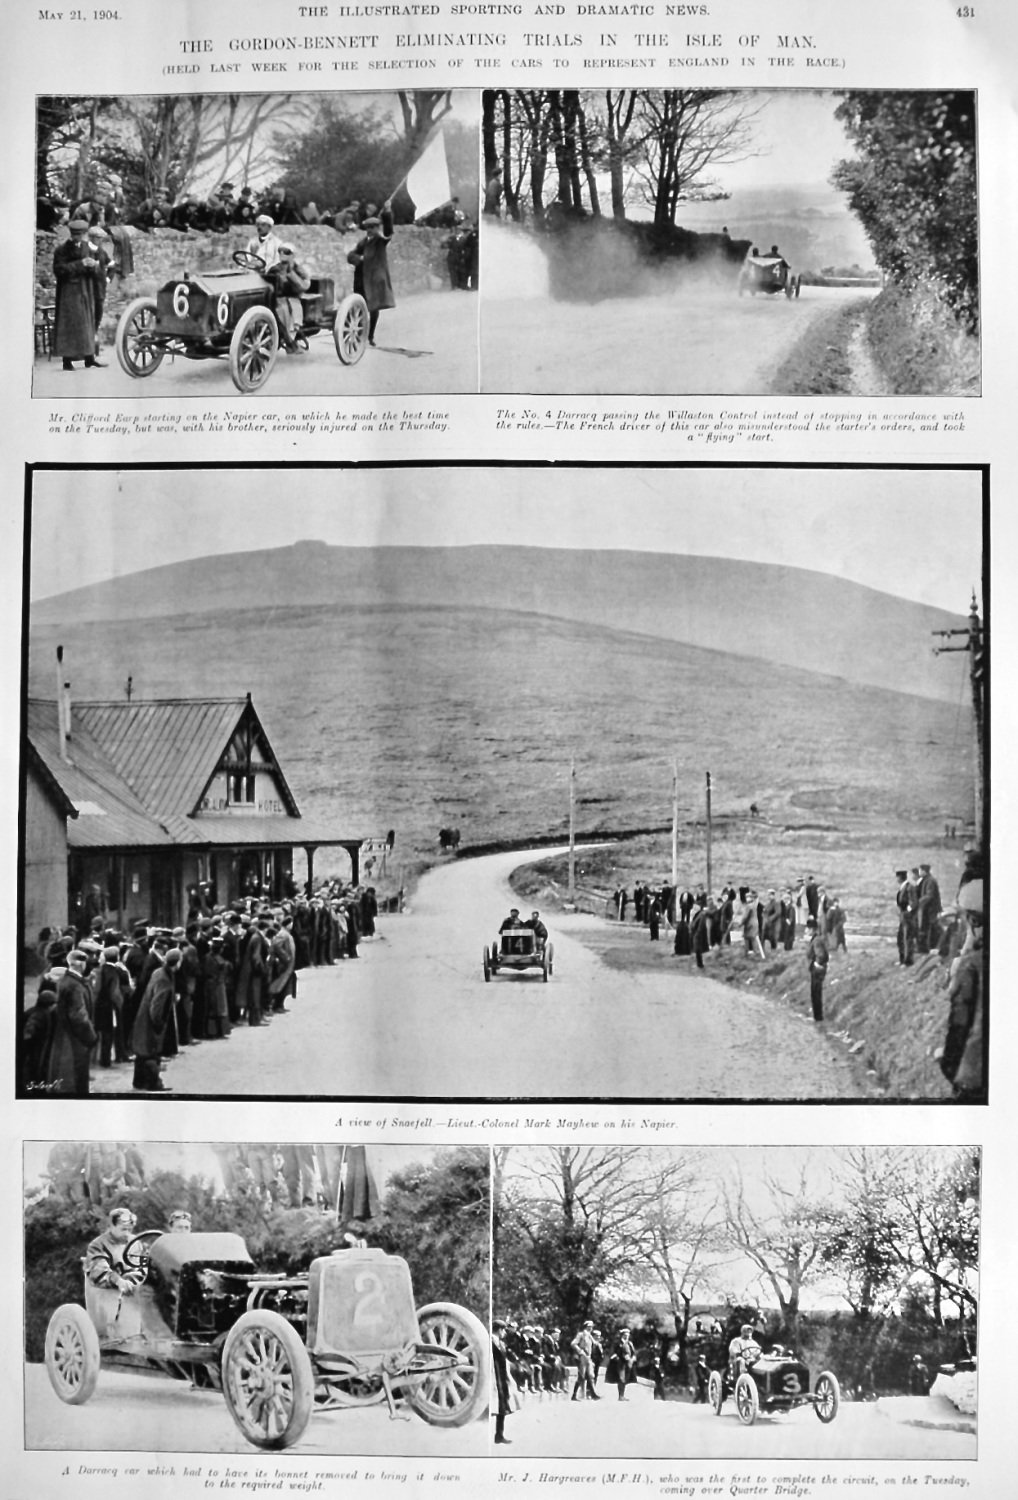 The Gordon-Bennett Eliminating Trials in the Isle of Man.  1904.